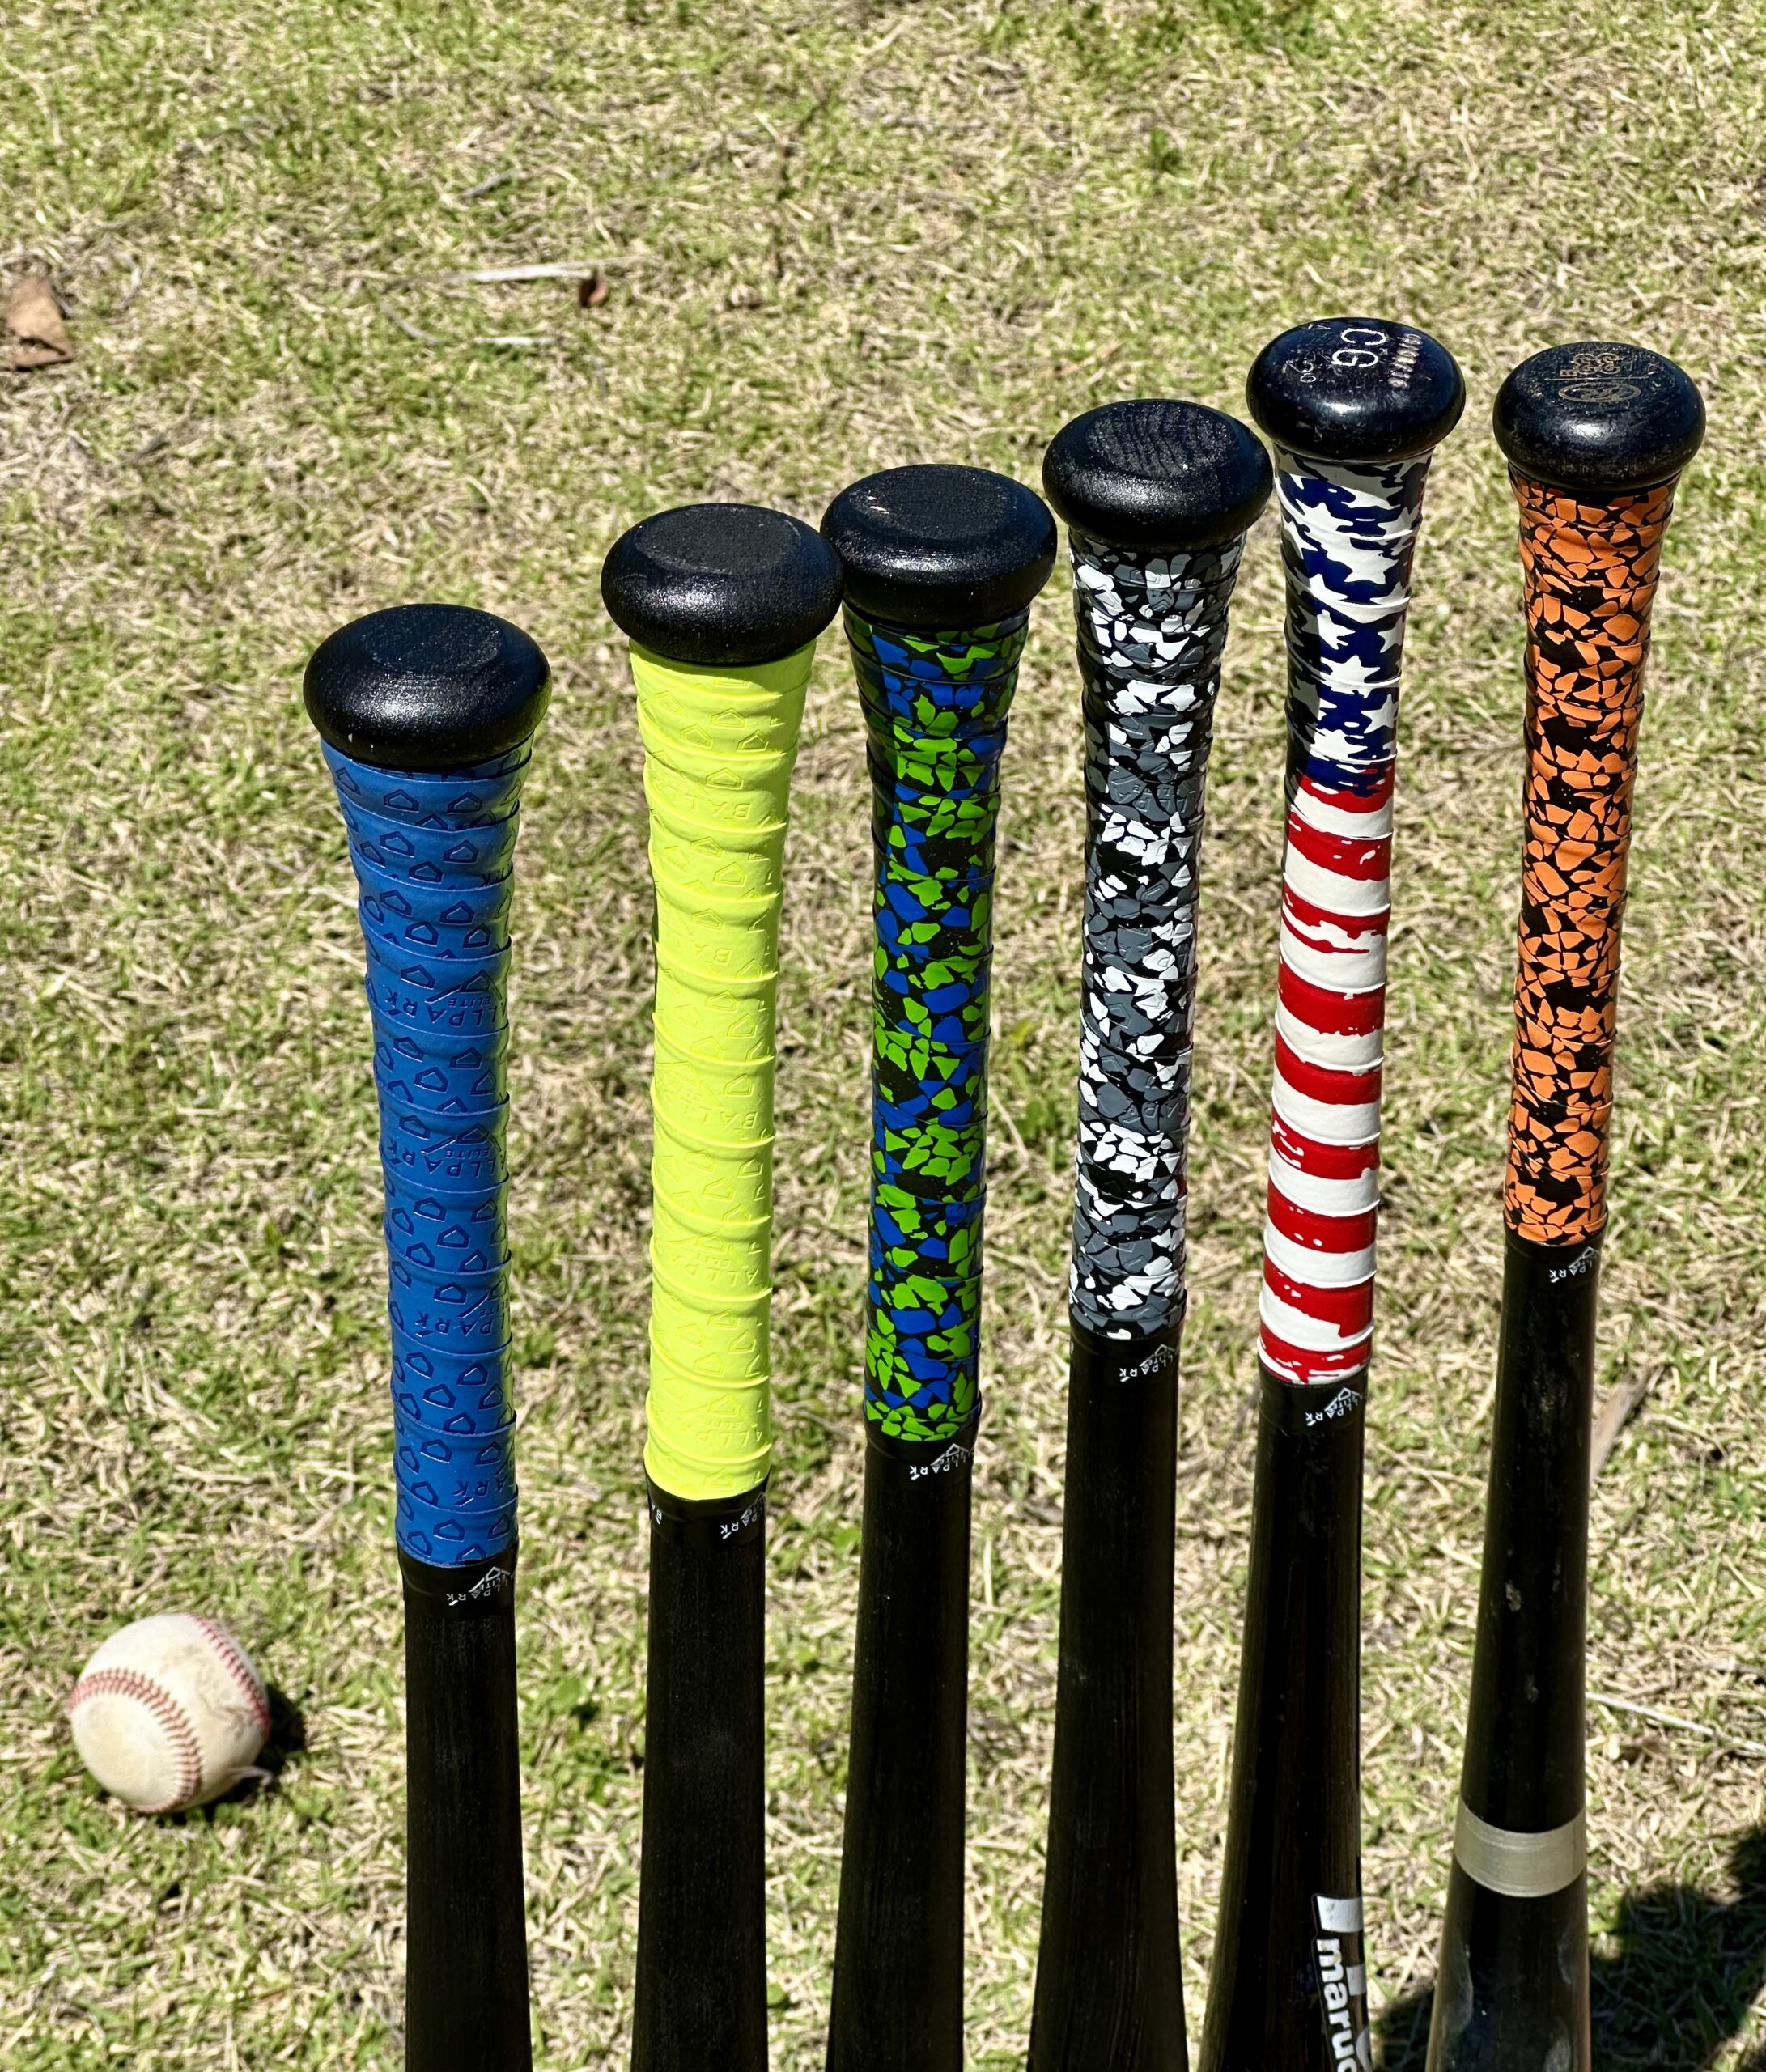 Blue and Green Peble Camo Bat Grip Tape 1.10mm by Ballpark Elite